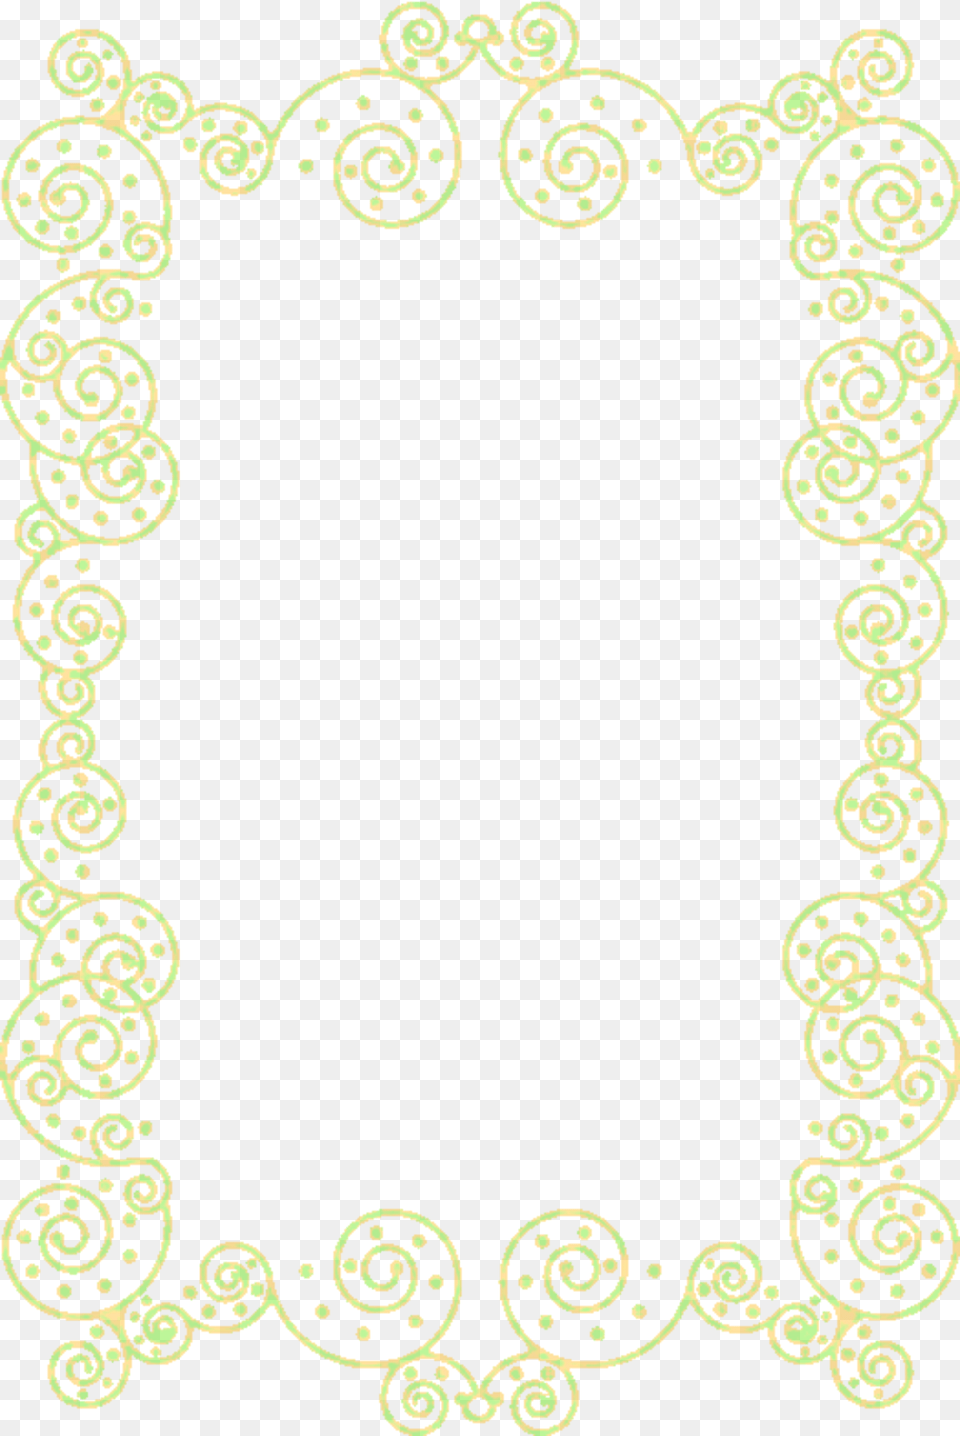 Peacock Creations Event Design By Tara Tippel Circle, Pattern, Art, Floral Design, Graphics Png